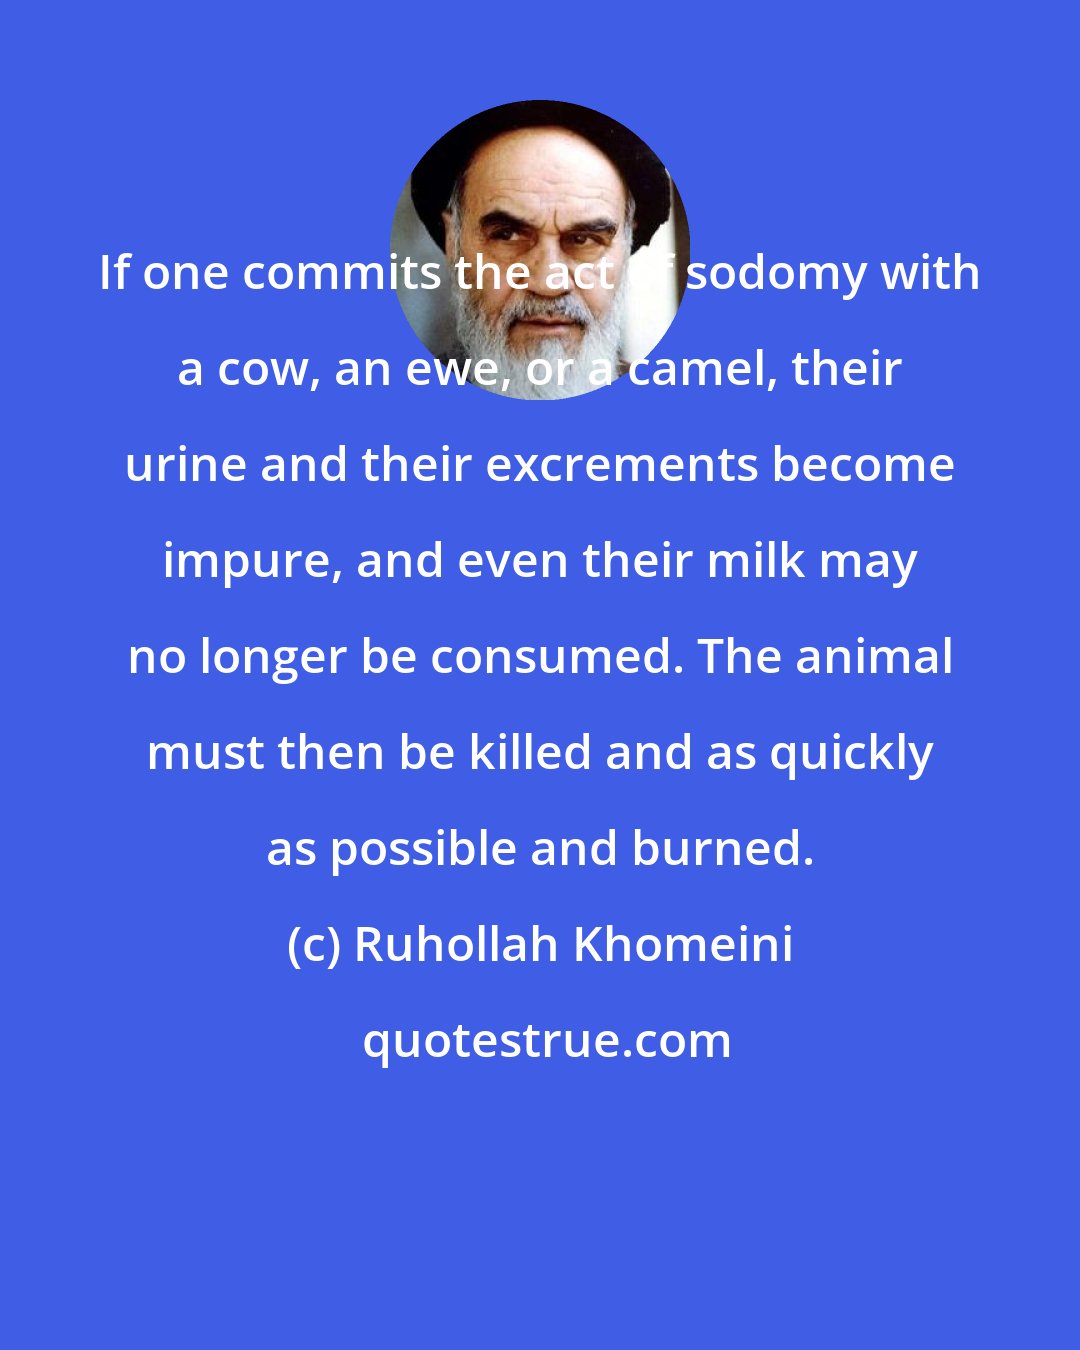 Ruhollah Khomeini: If one commits the act of sodomy with a cow, an ewe, or a camel, their urine and their excrements become impure, and even their milk may no longer be consumed. The animal must then be killed and as quickly as possible and burned.